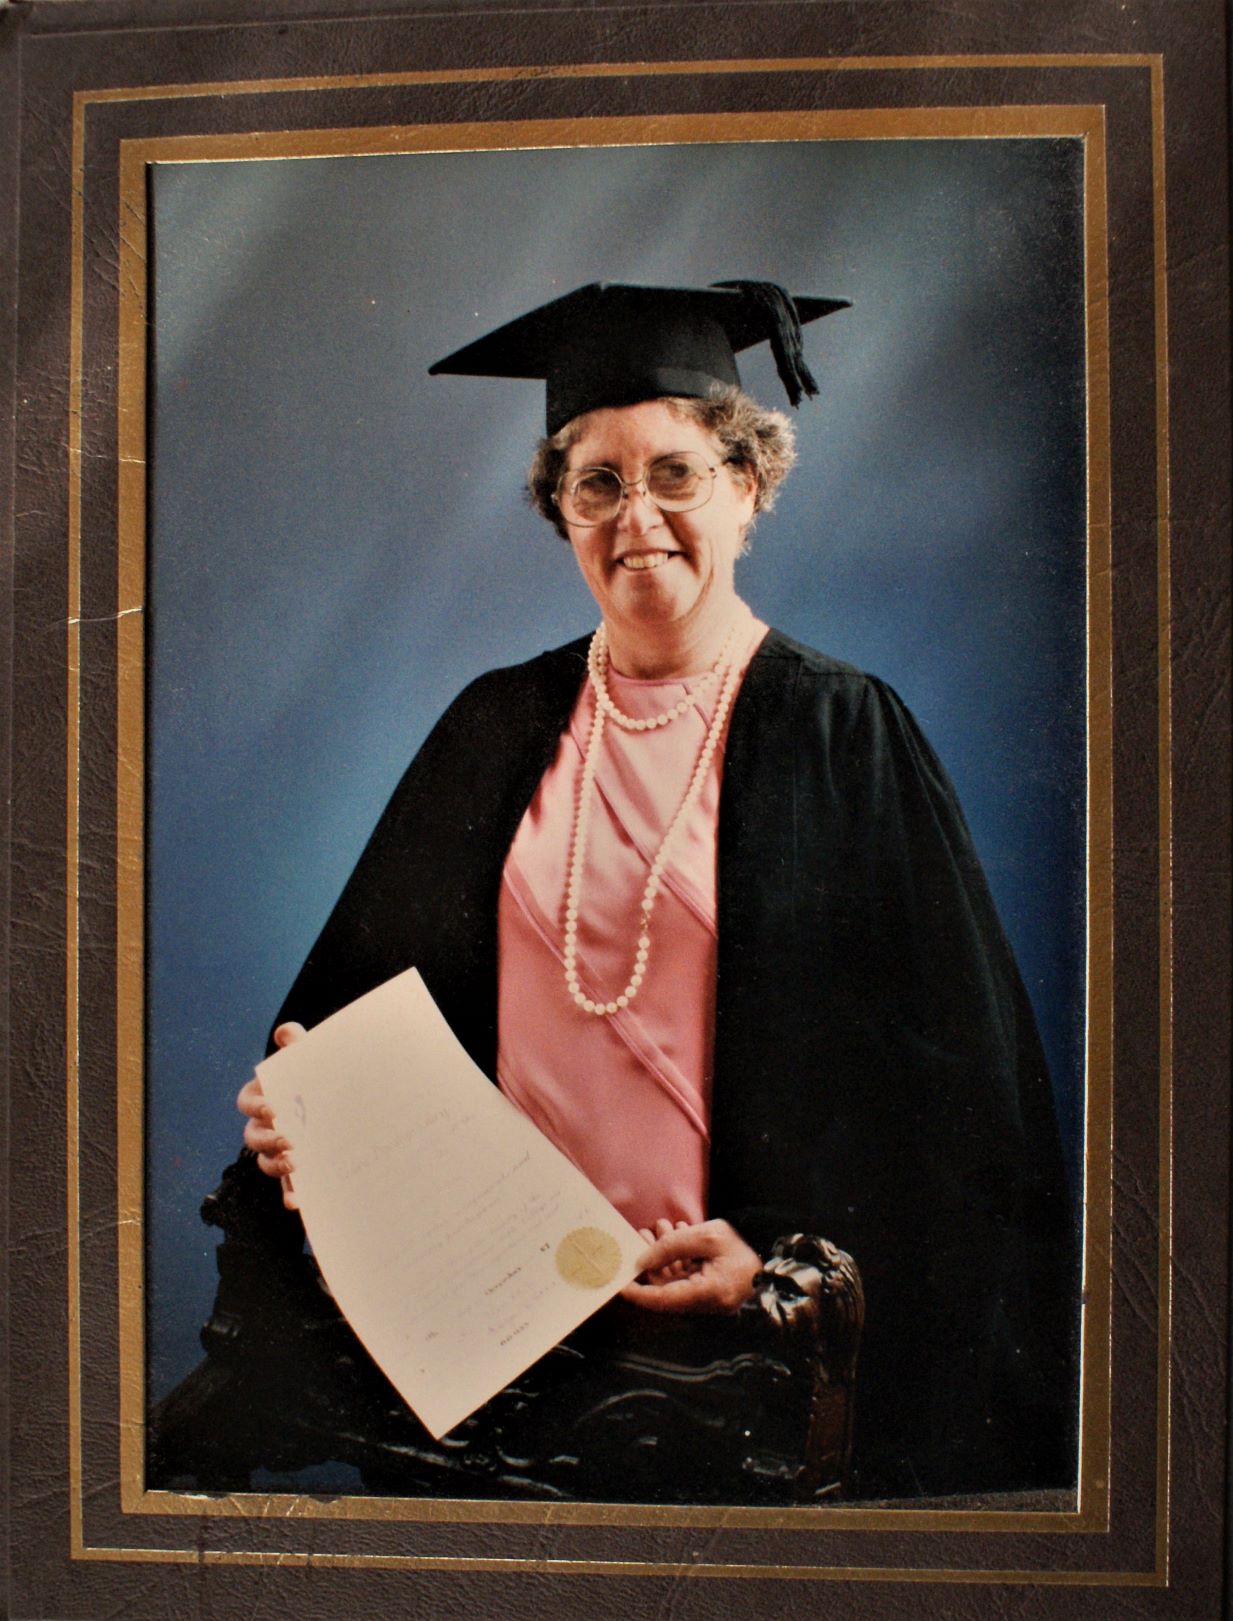 Studio shot of Lesley dressed in graduation gown and mortar board. Seated sand smiling, she holds her diploma